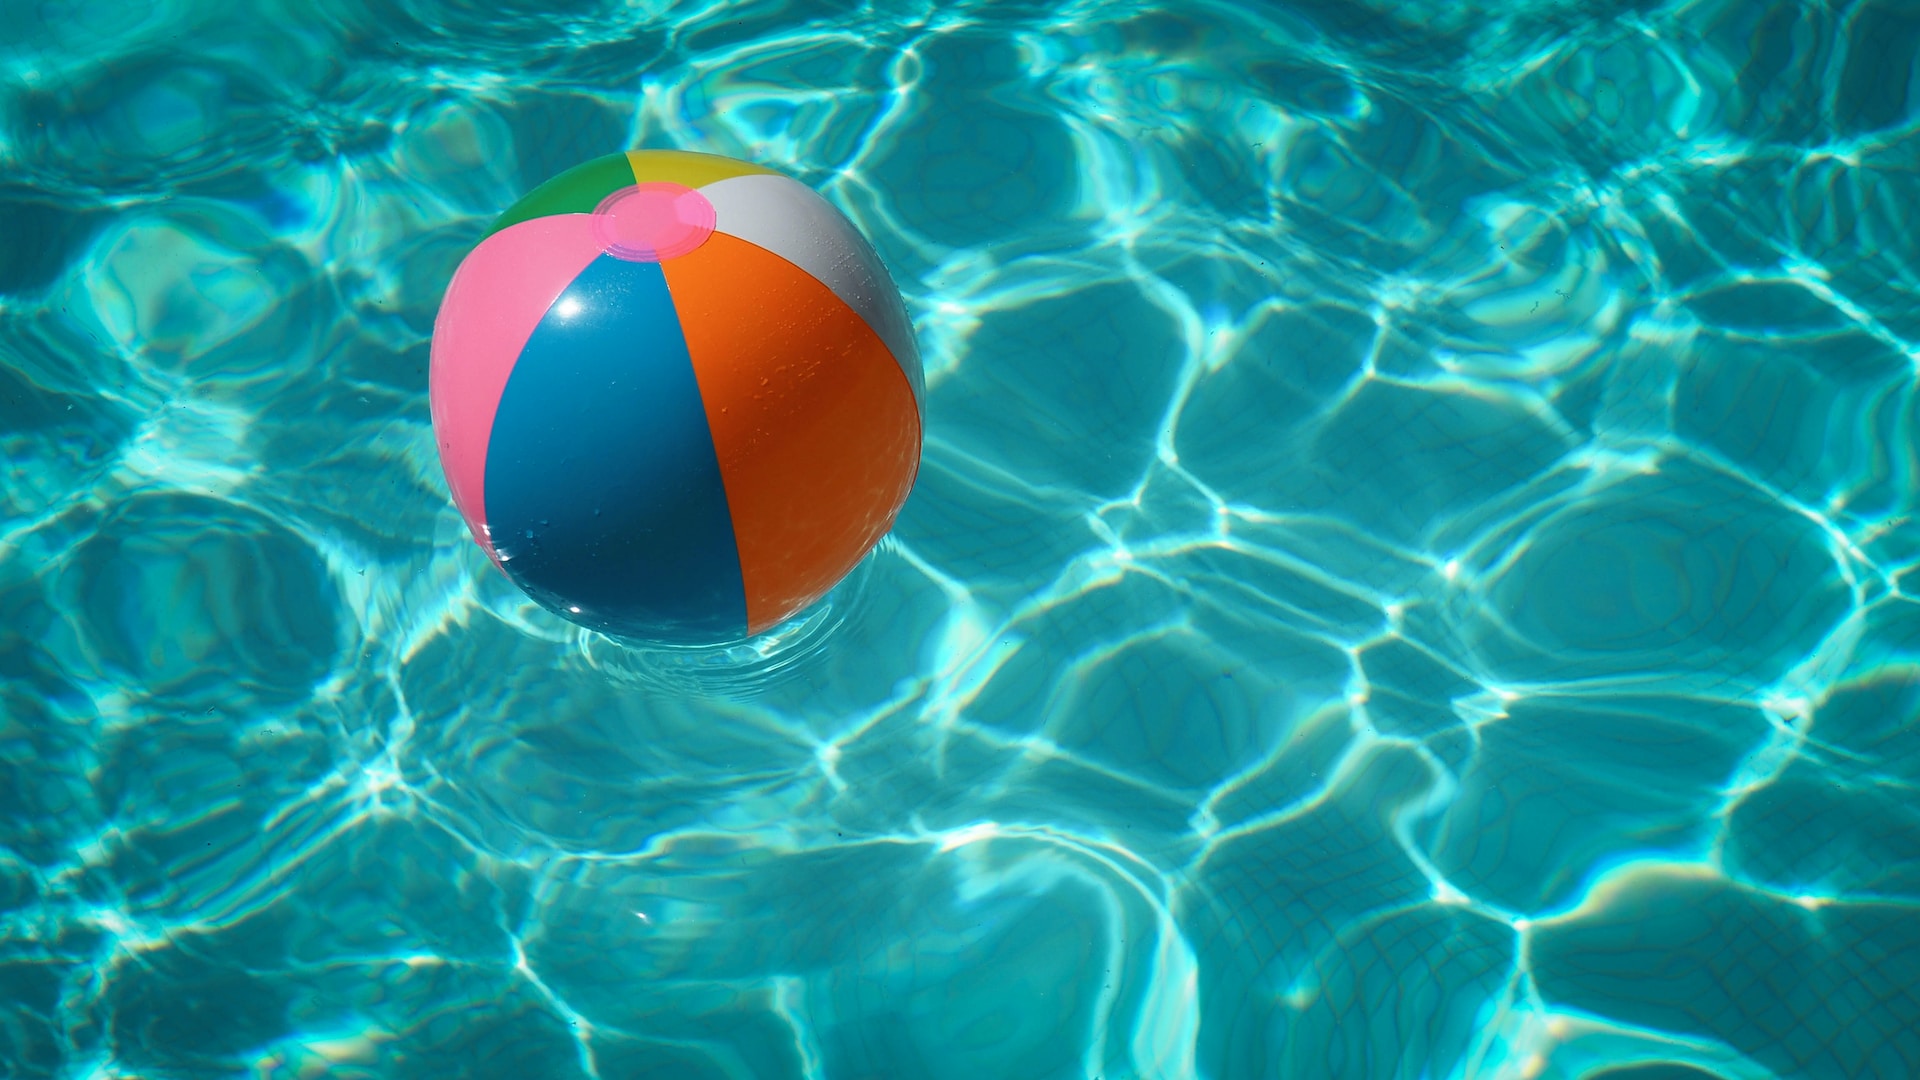 Beach ball floating in clear pool water.